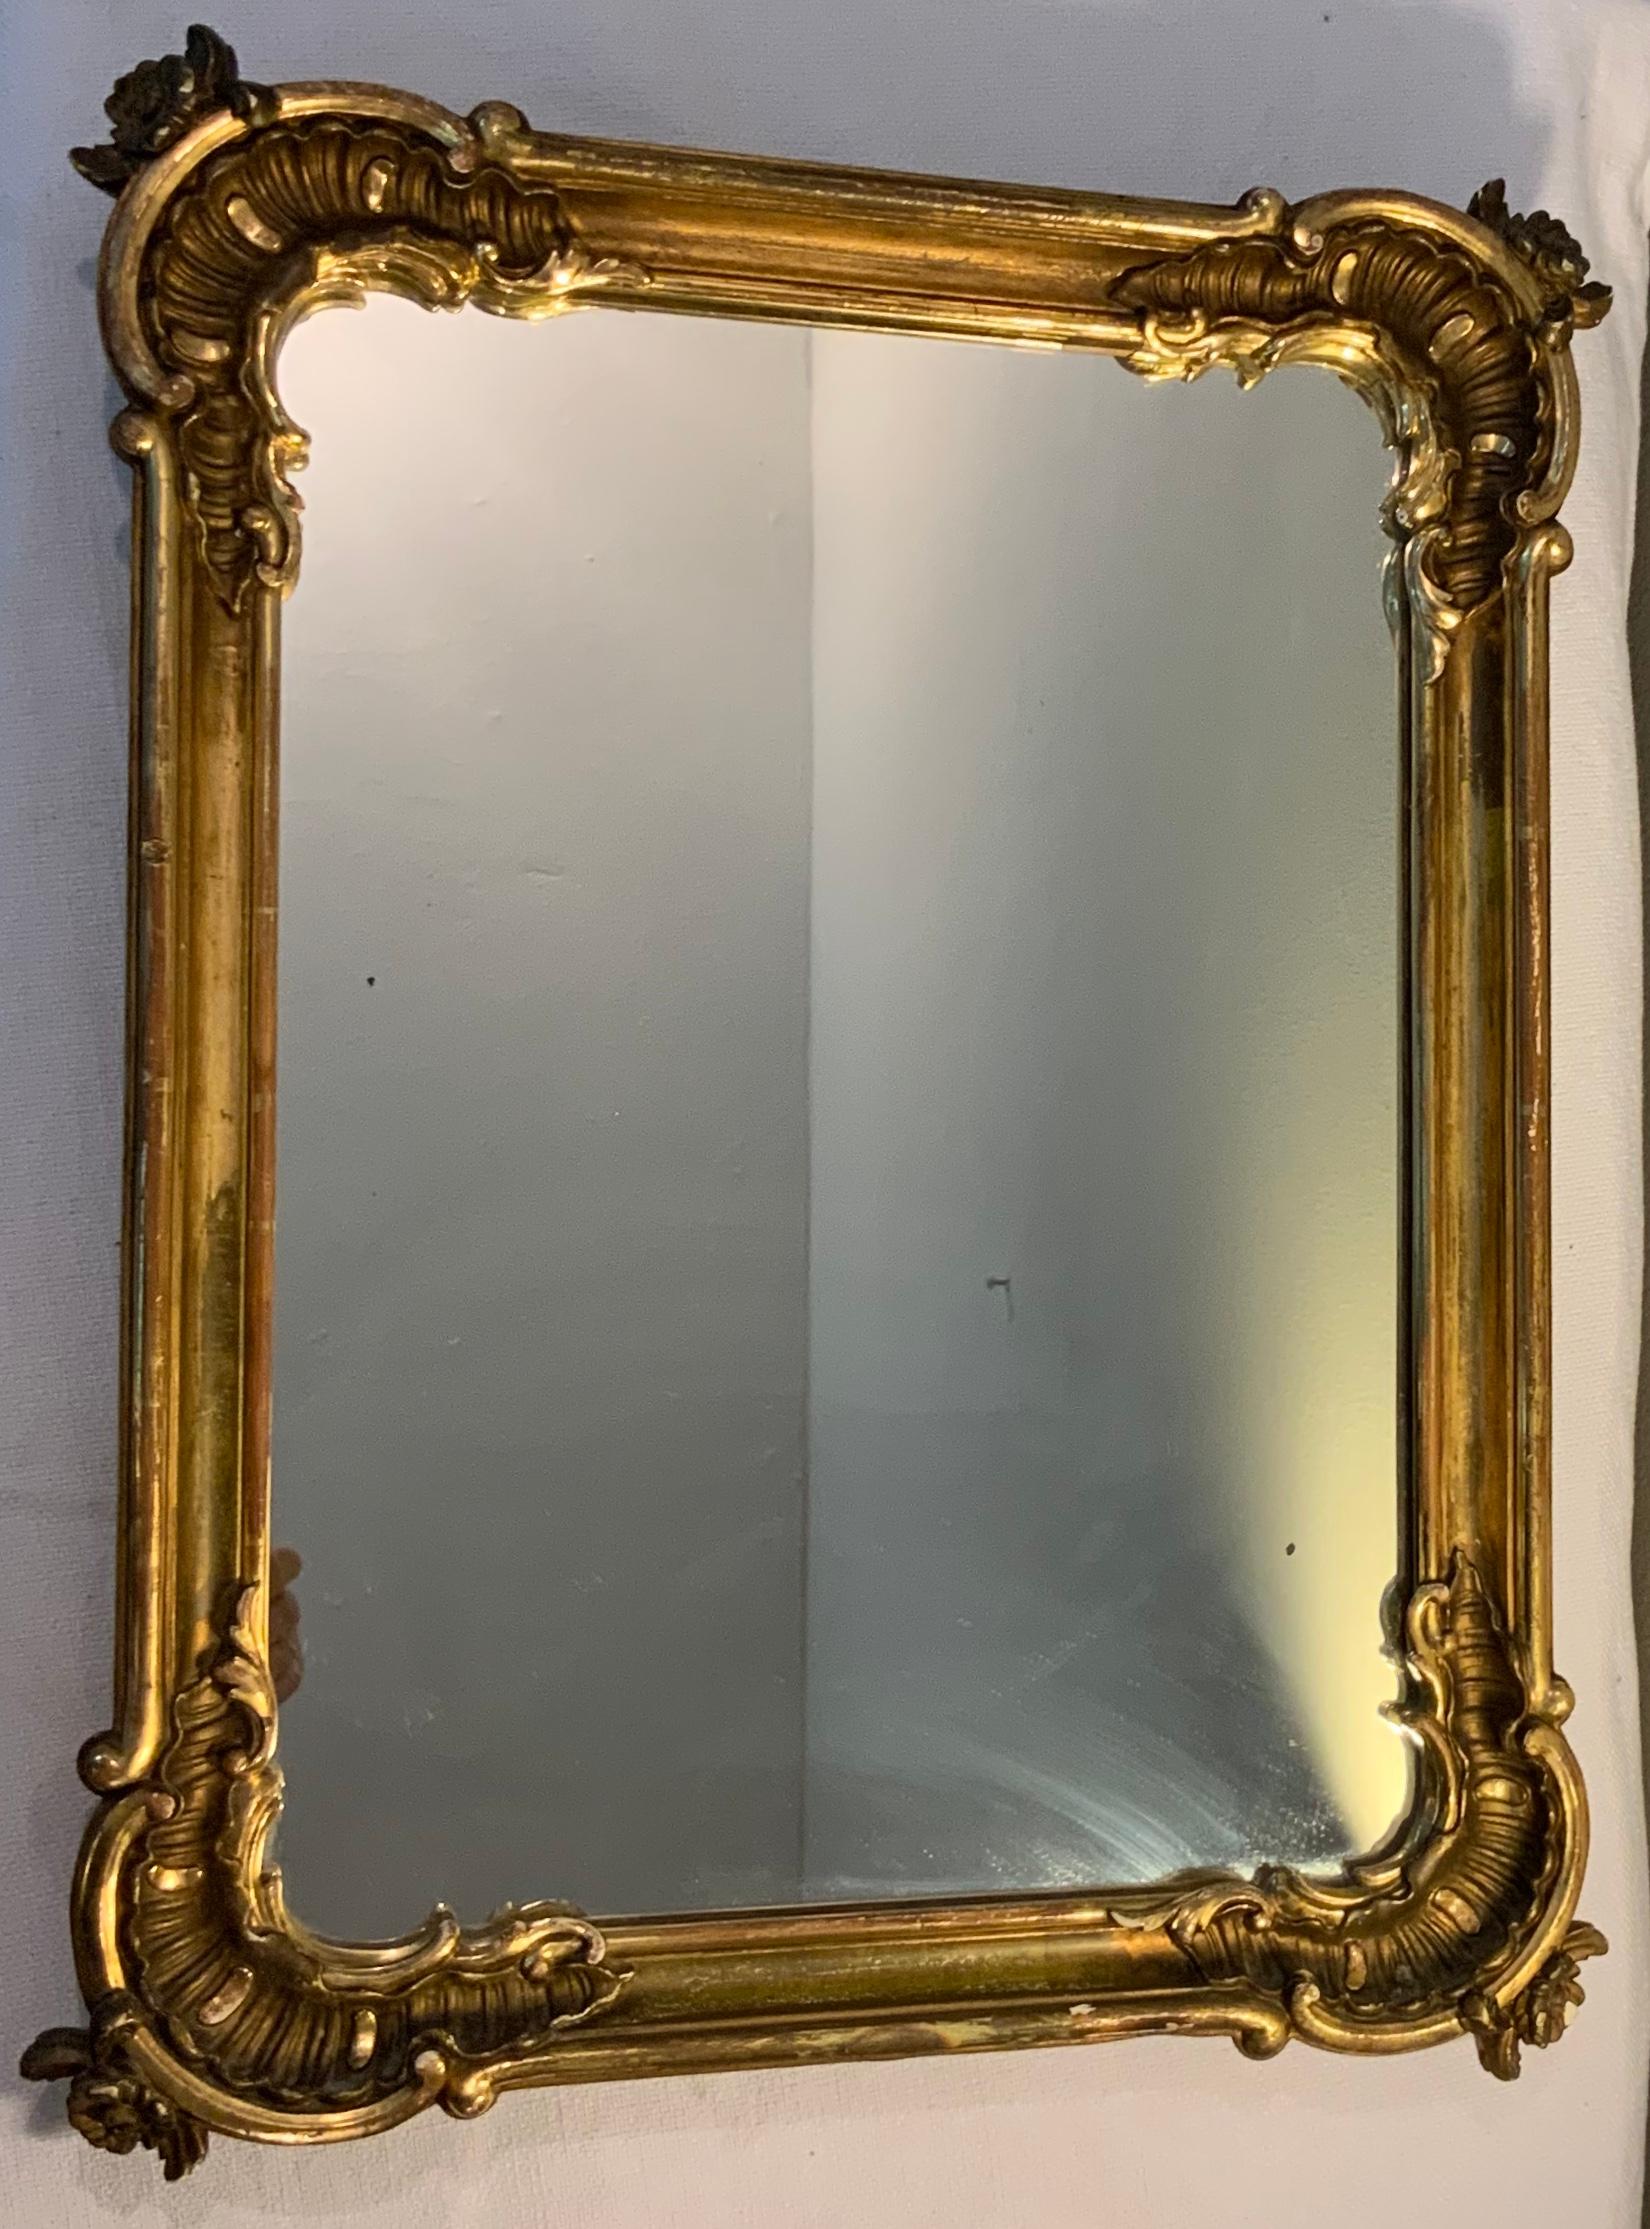 This a heavy rectangular gilt plaster-wood framed mirror adorned with large carved rocailles in the joints. Delicate scrolls delineate the borders and a rosette embellishes the top of each rocaille. There is a metal triangle hook in the upper back